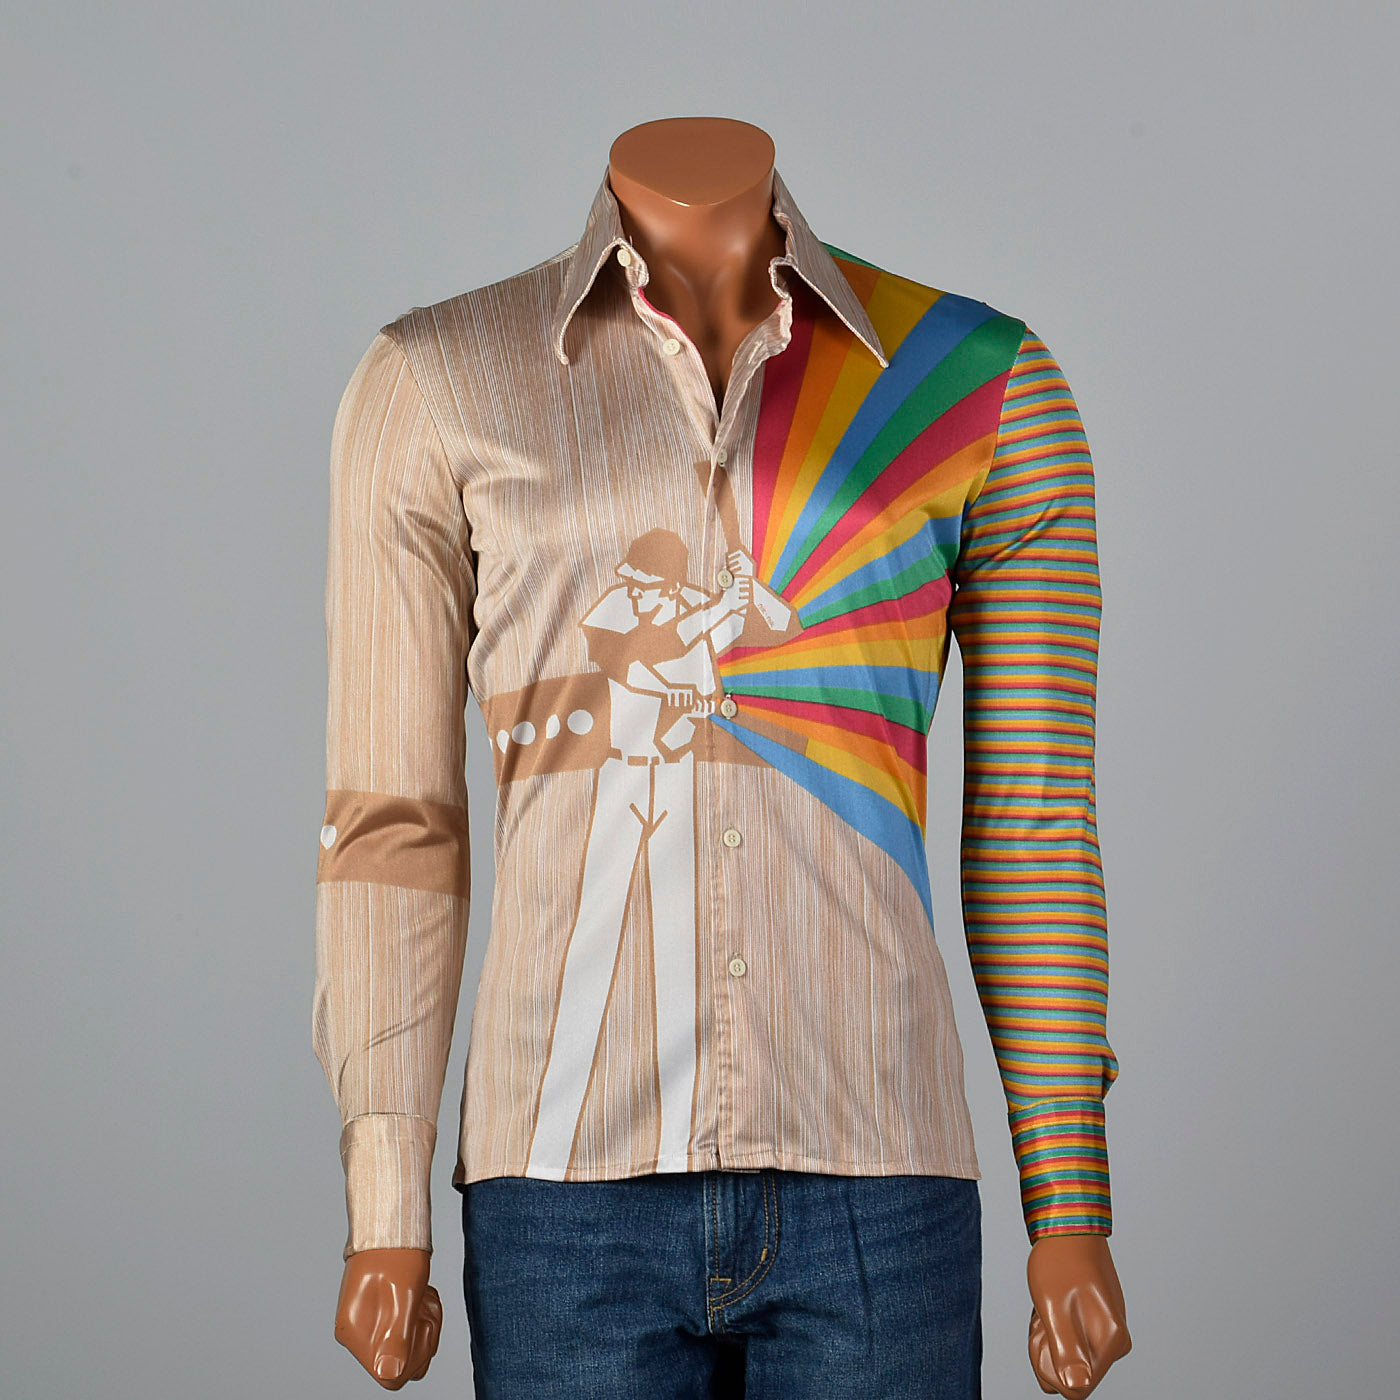 Styles Of The 70's - Polyester Nik Nik Disco Shirts [ Being Ron ]